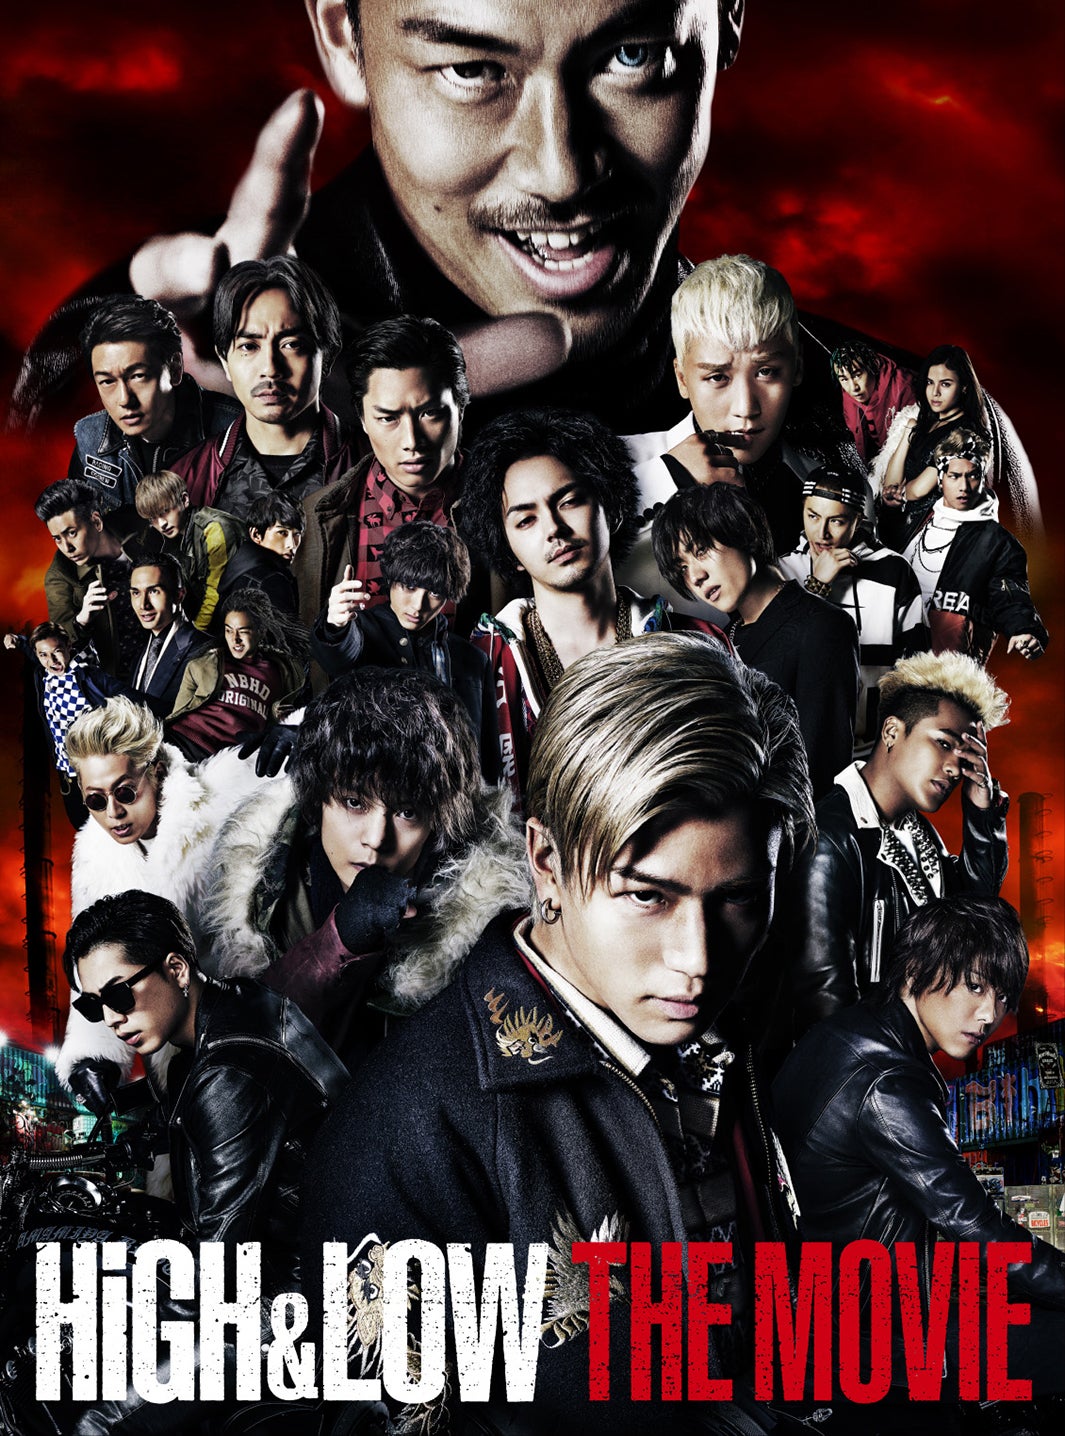 Exile 三代目jsbら出演 High Low Cinema Fighters Project シリーズ無料配信決定 モデルプレス